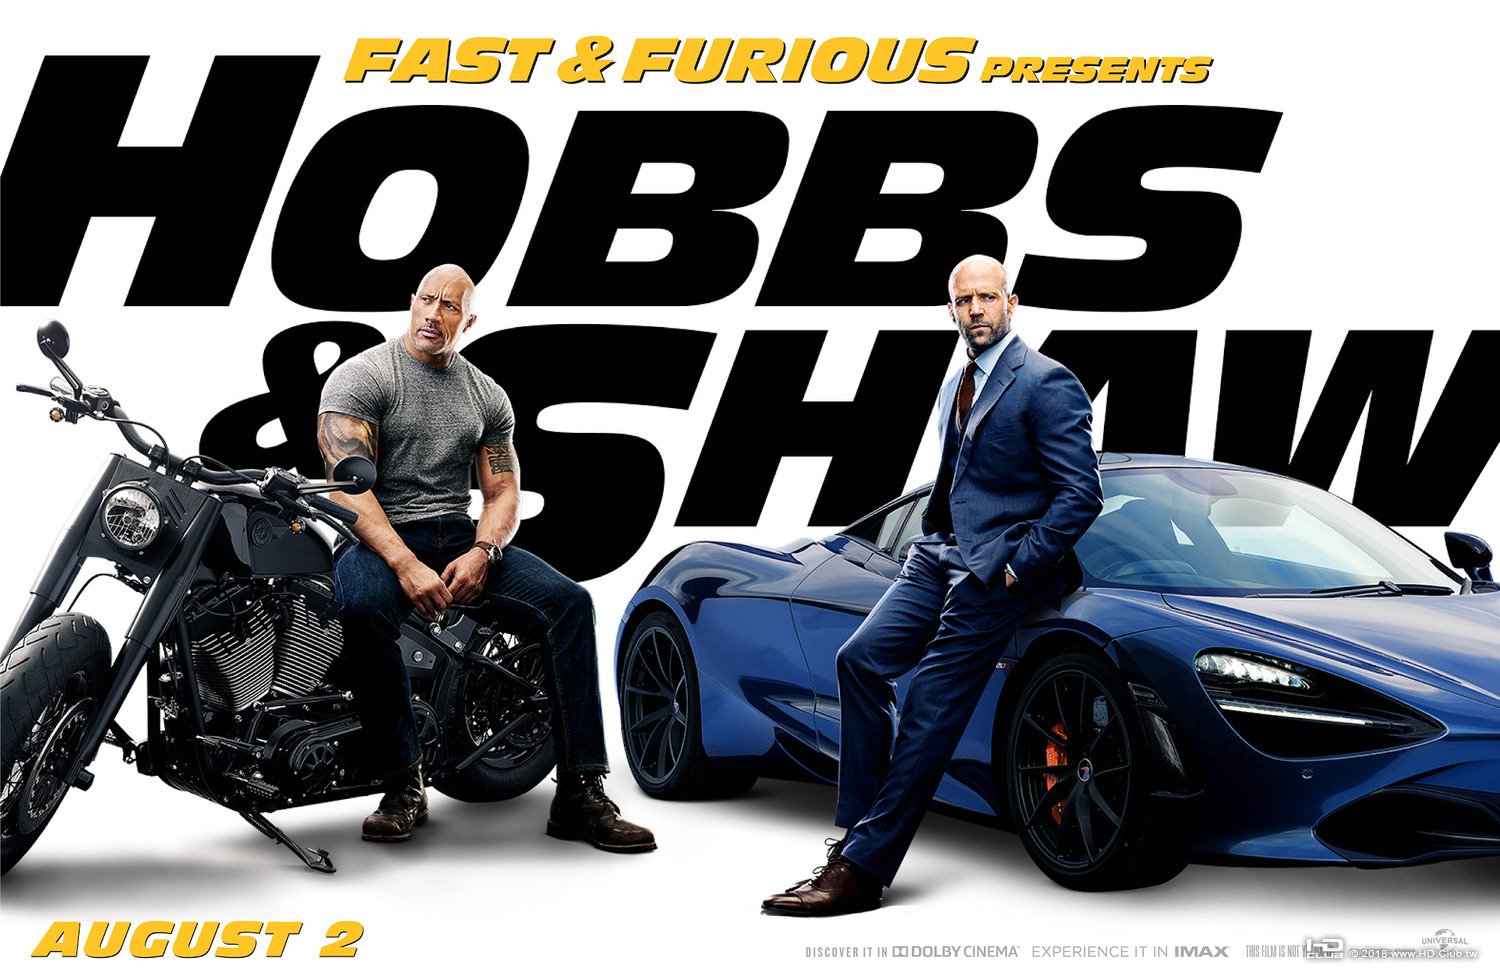 hobbs_and_shaw_ver9_xlg.jpg